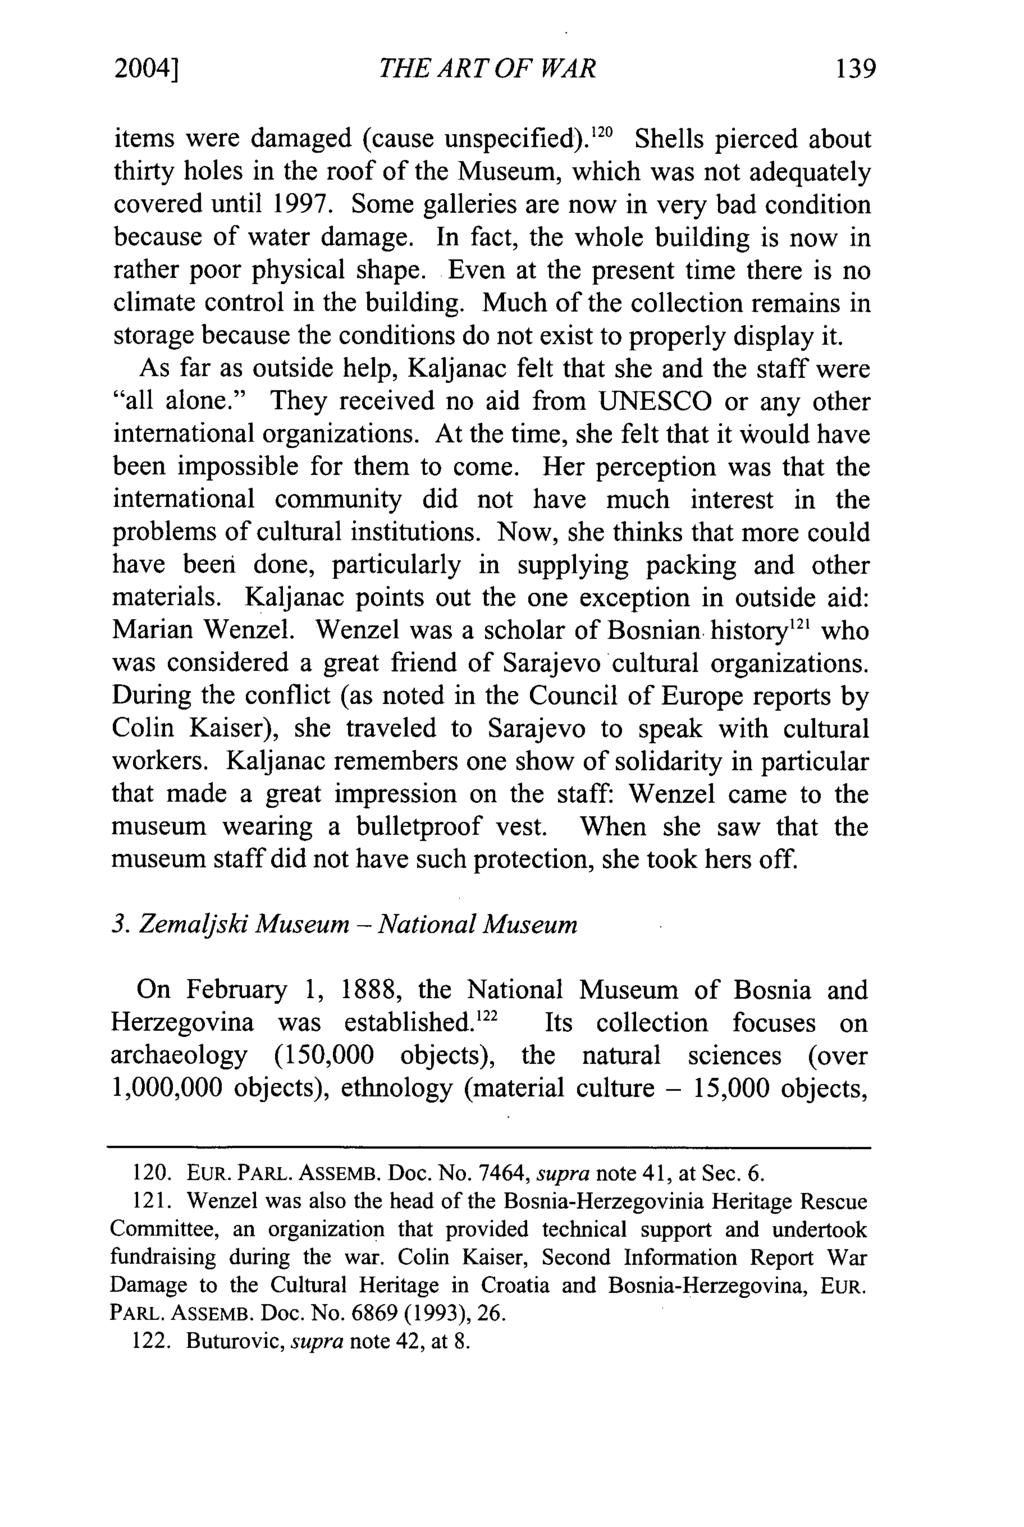 2004] Kossiakoff: The Art of War: The Protection of Cultural Property during the "S THE ART OF WAR items were damaged (cause unspecified).